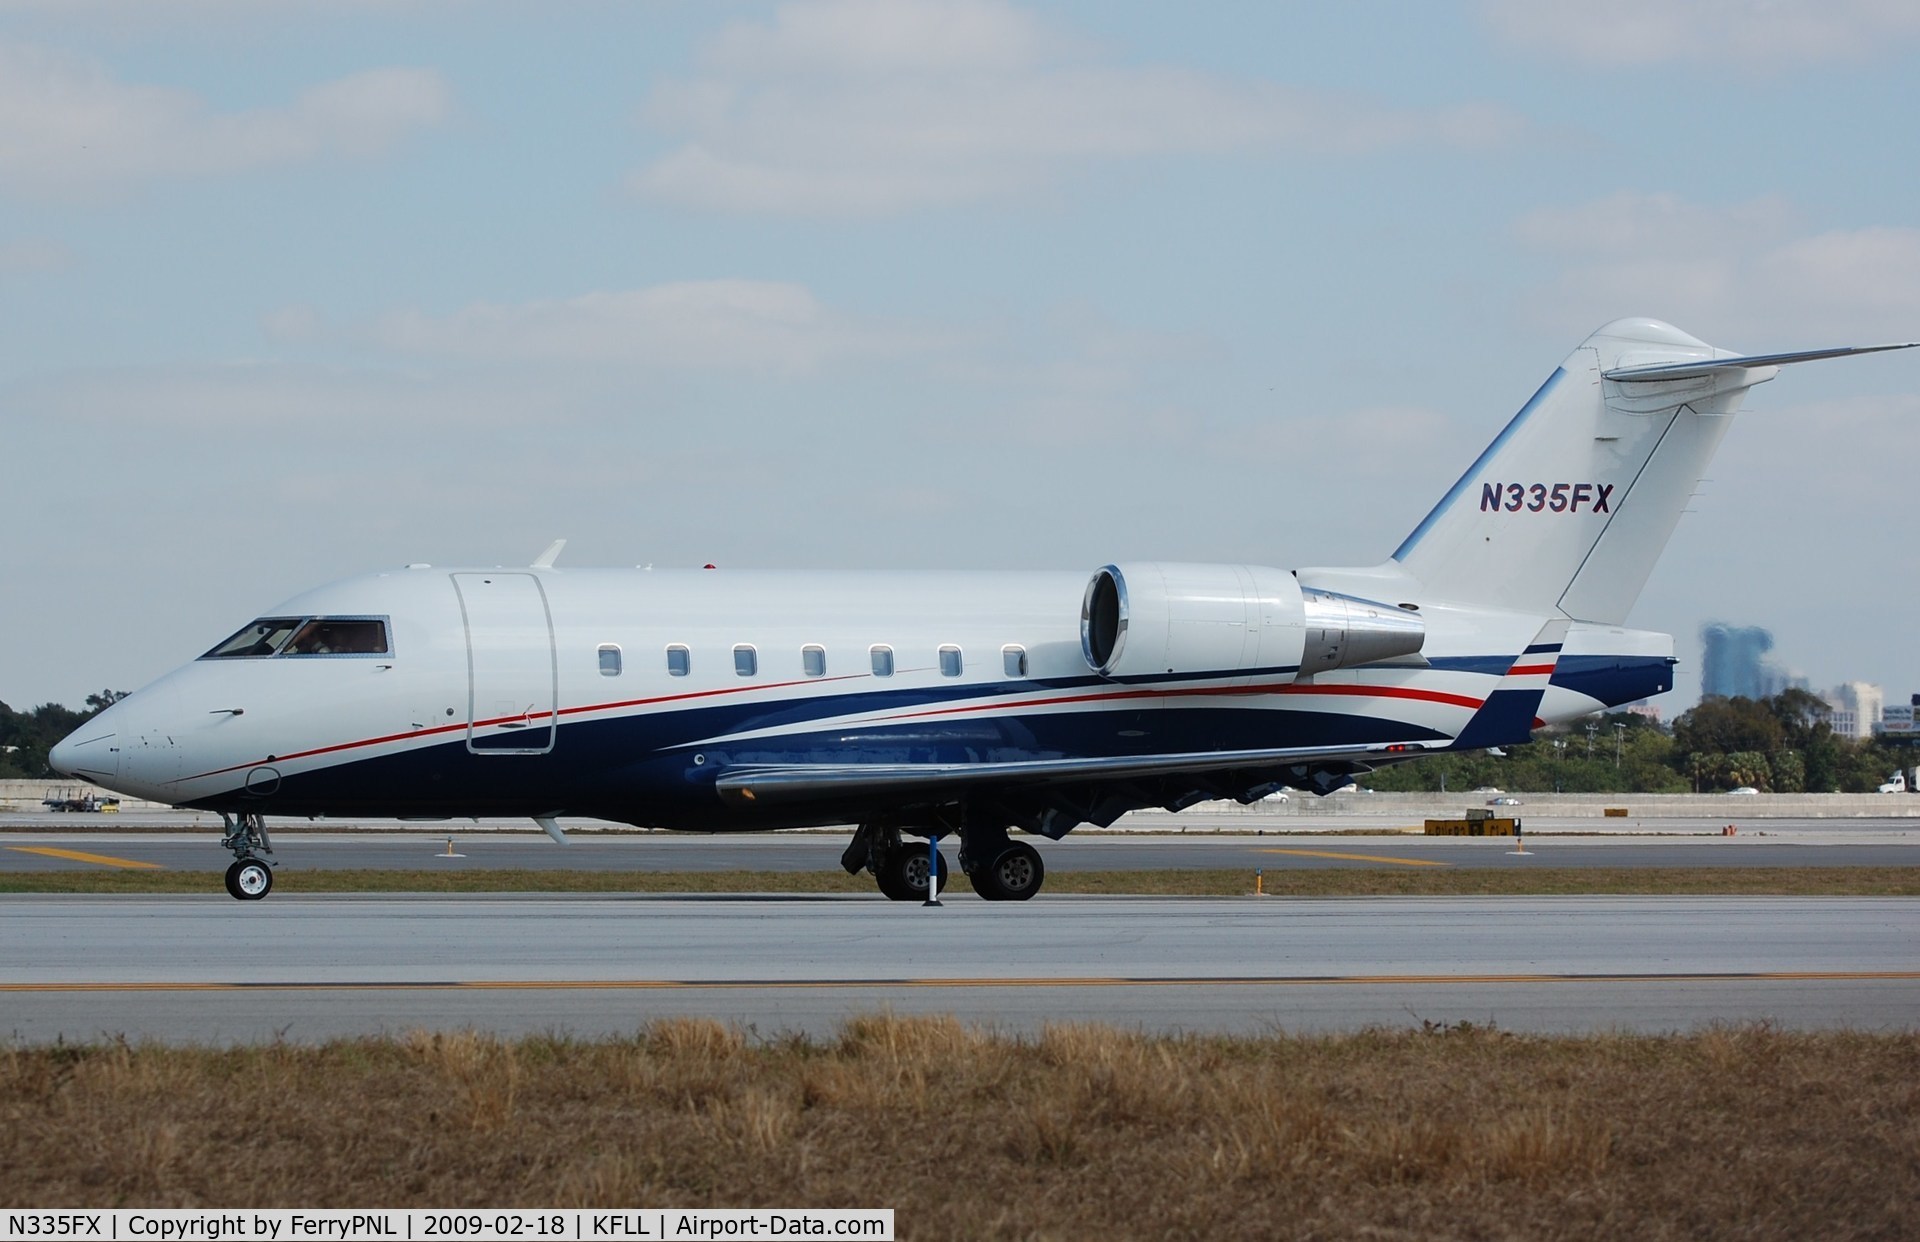 N335FX, 2005 Bombardier Challenger 604 (CL-600-2B16) C/N 5619, CL604 of Bombardier Jet Solutions